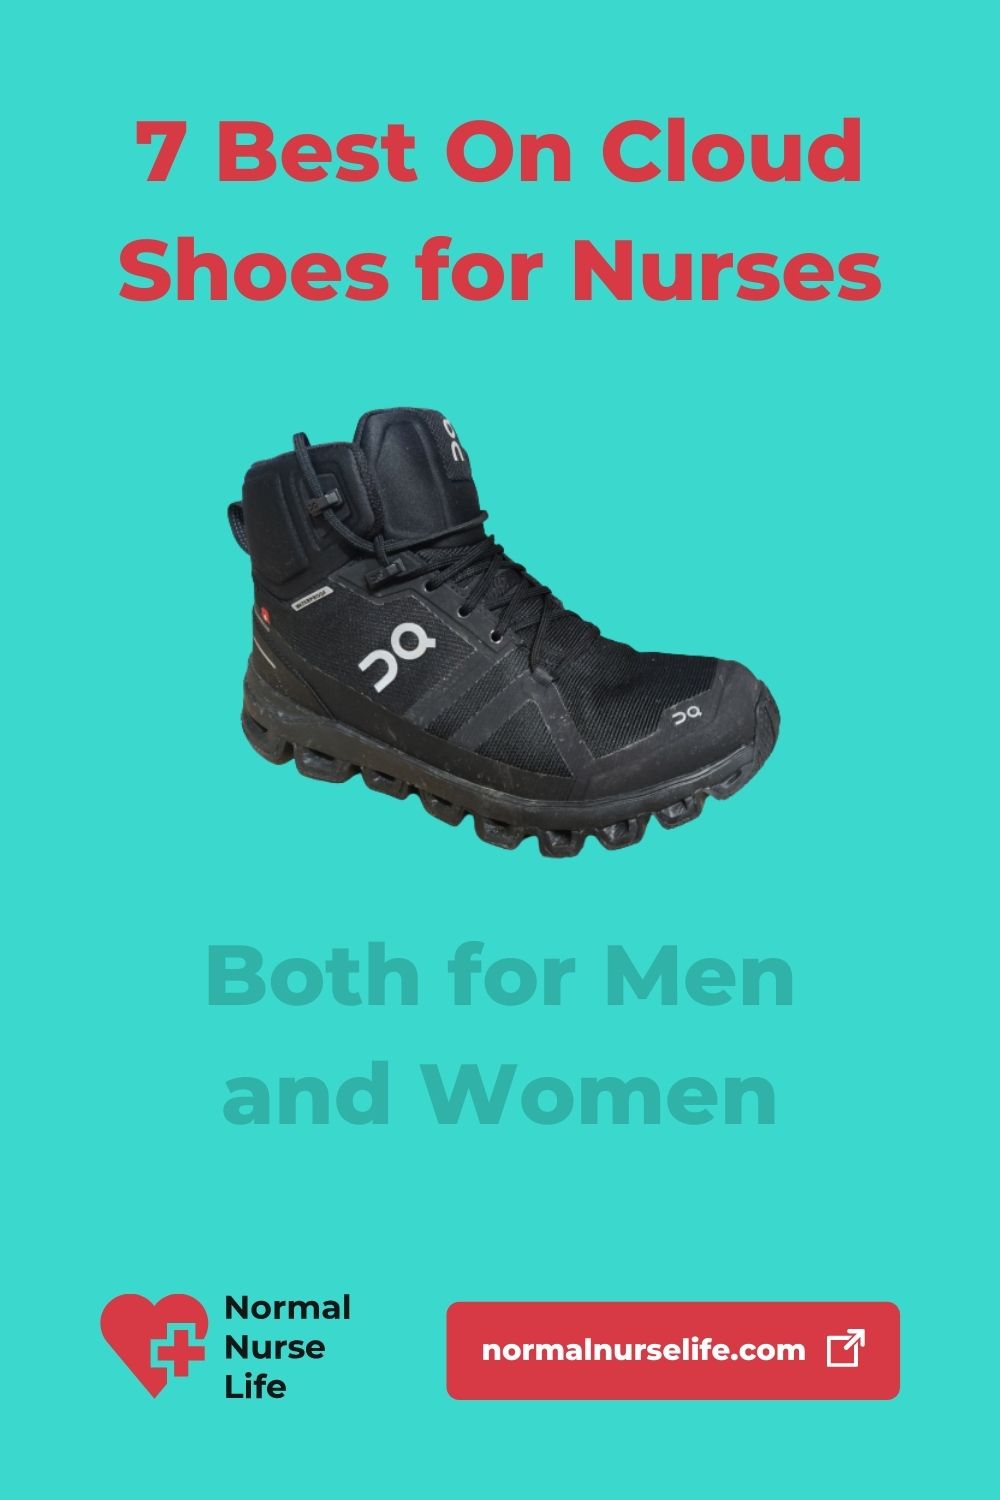 Best On Cloud Shoes for Healthcare Workers